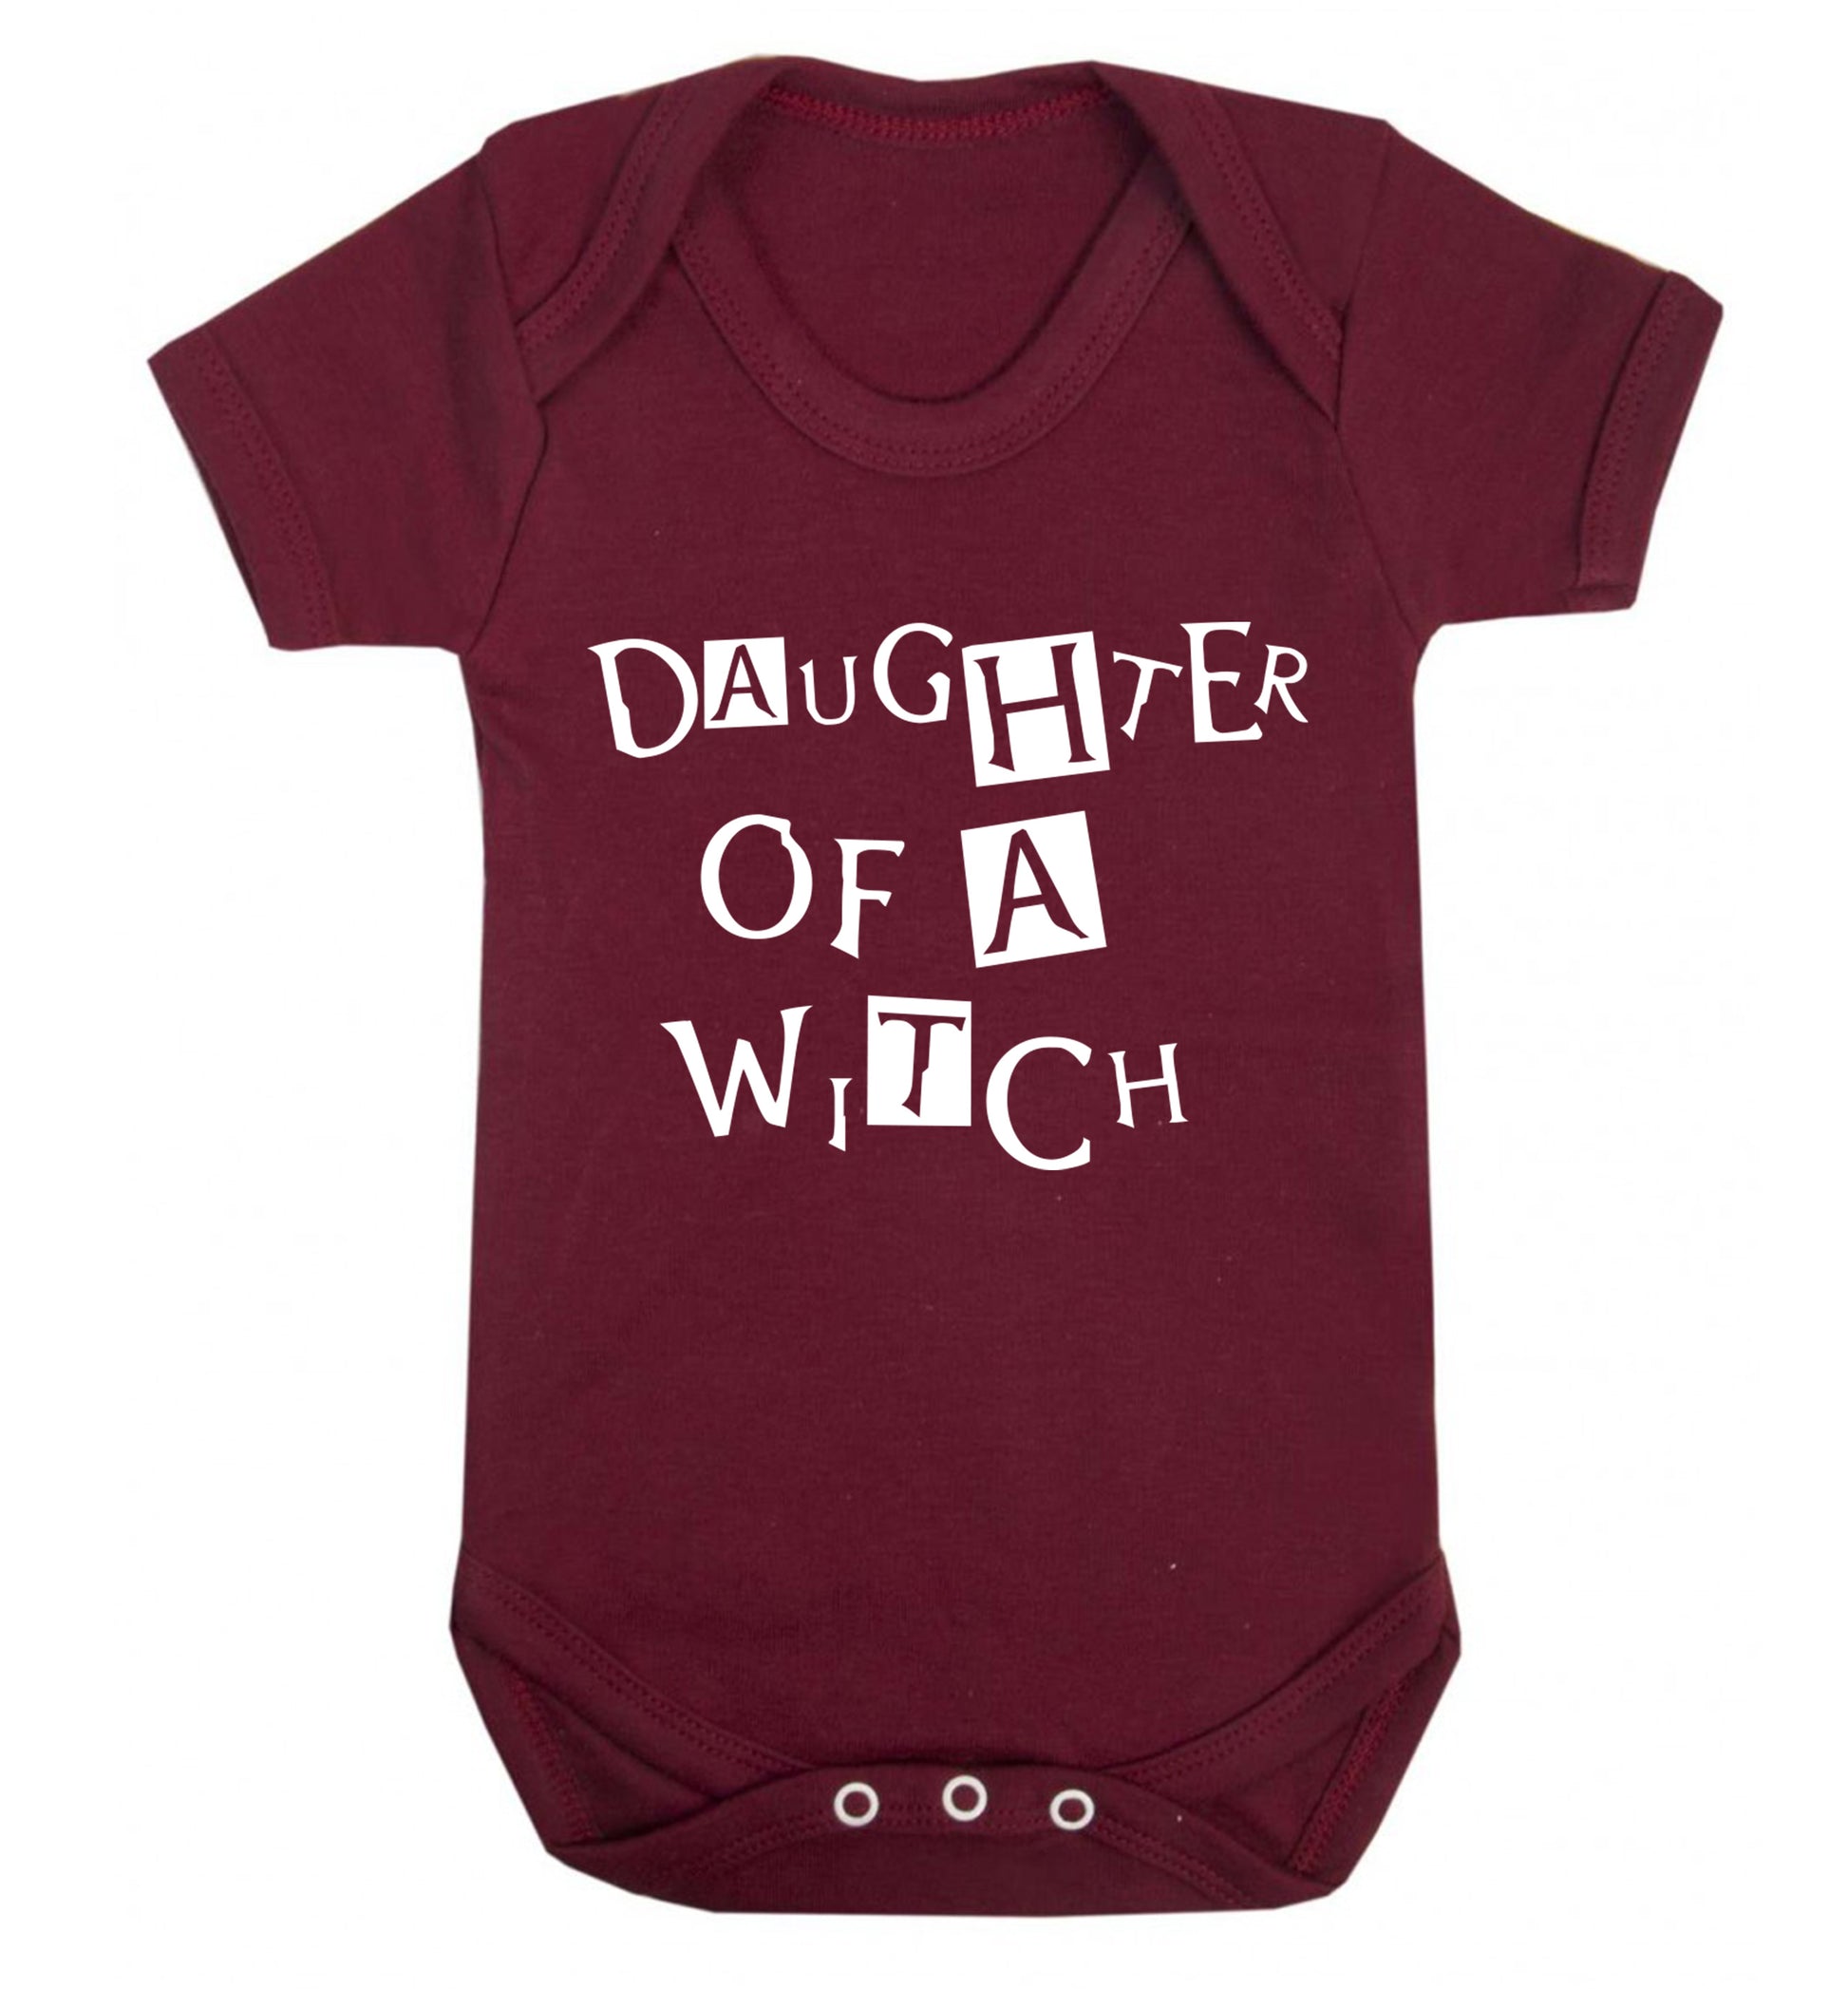 Daughter of a witch Baby Vest maroon 18-24 months